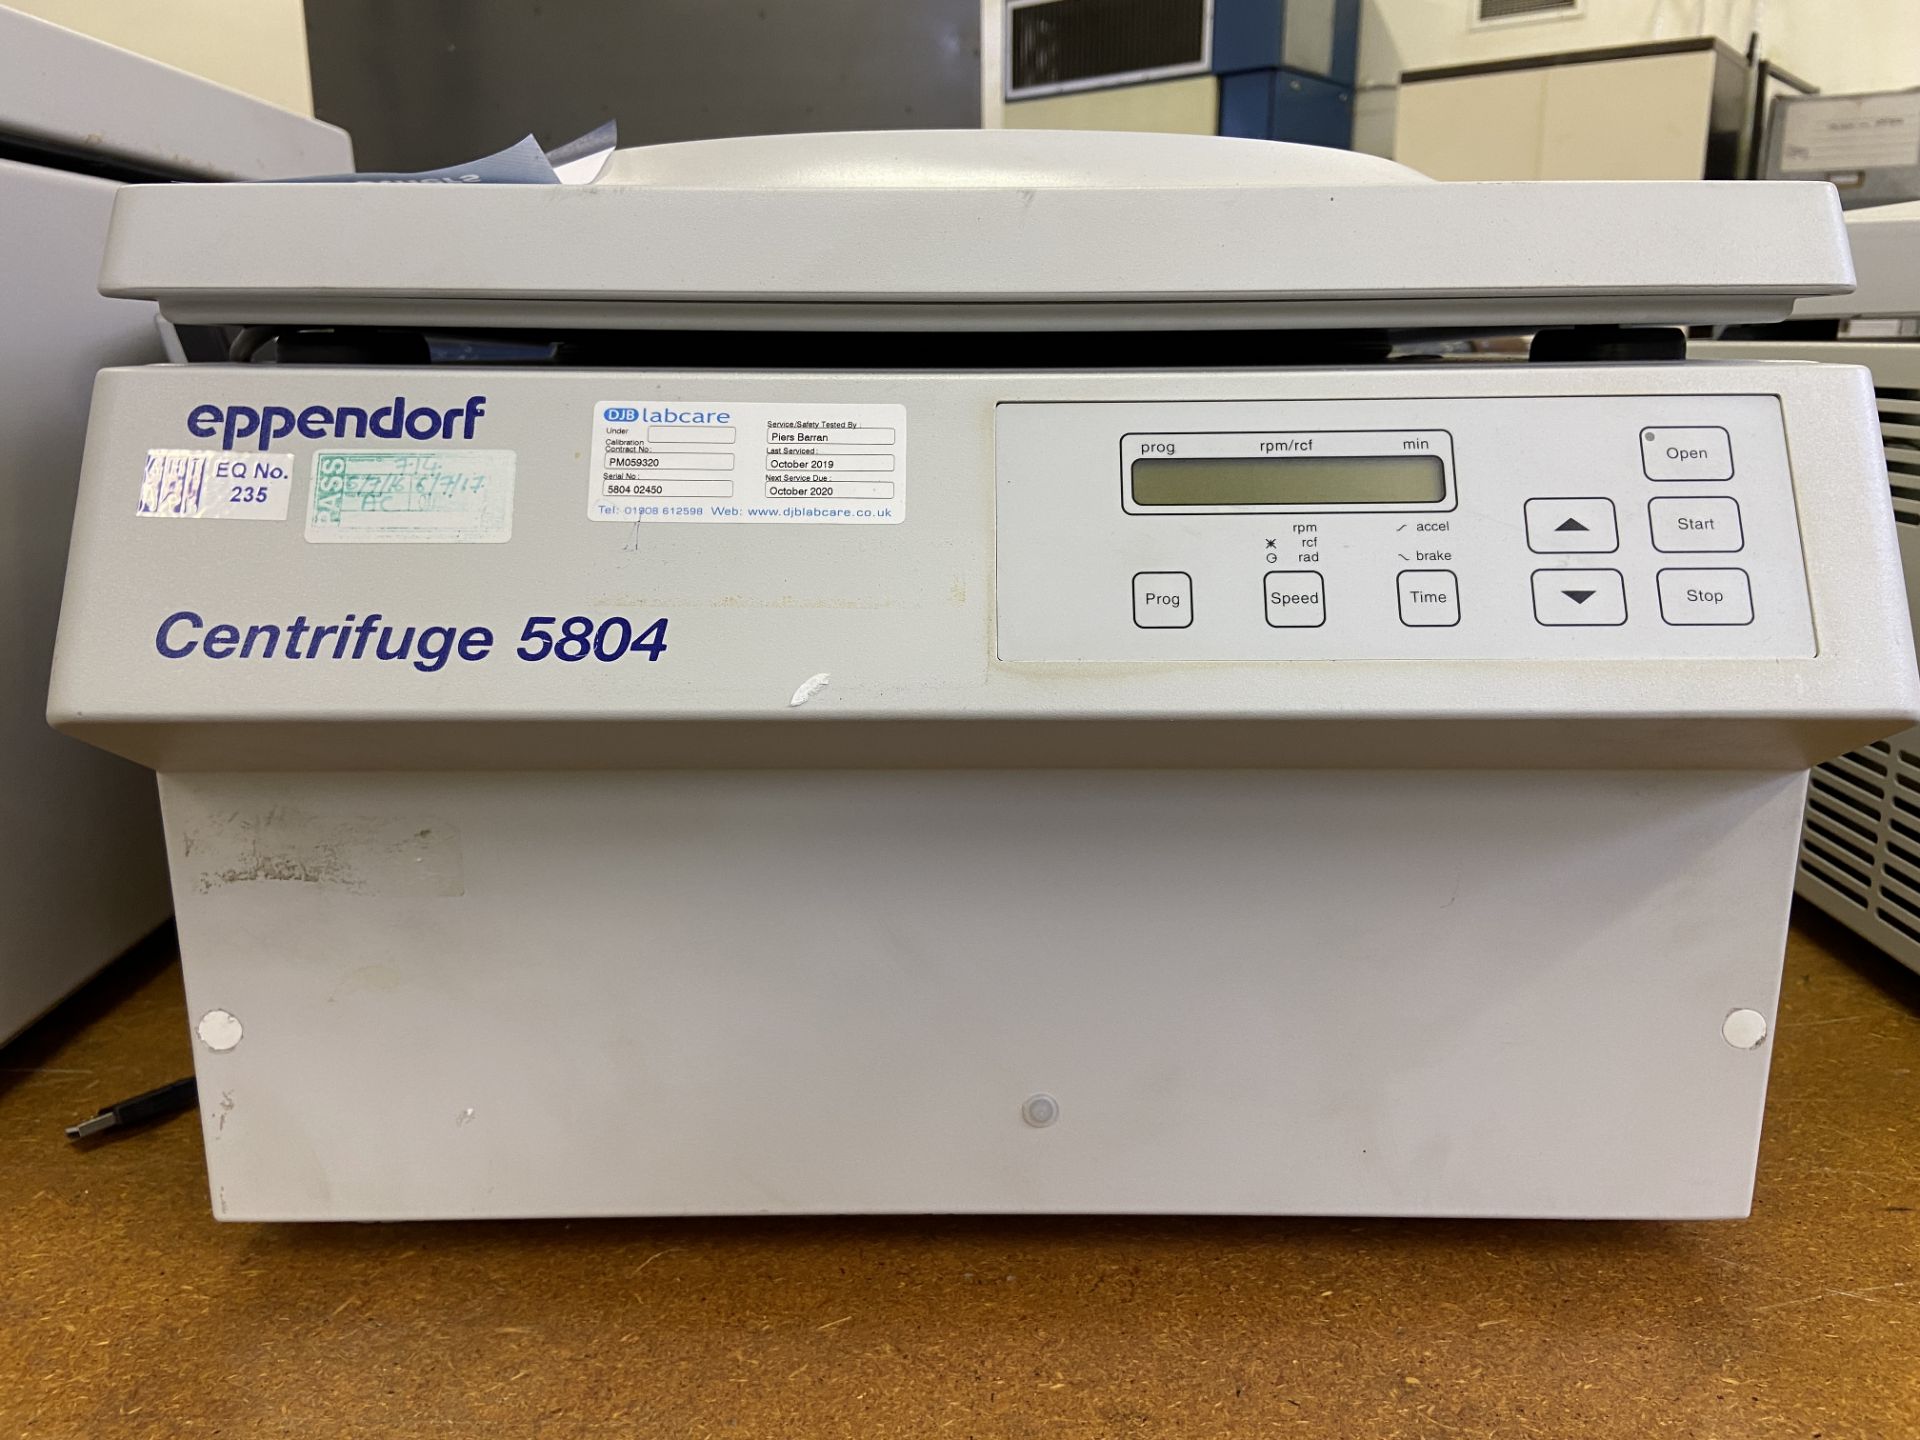 Eppendorf 5804 benchtop centrifuge, Serial No. 580402450 (2001) with 240v power cable - Image 2 of 2